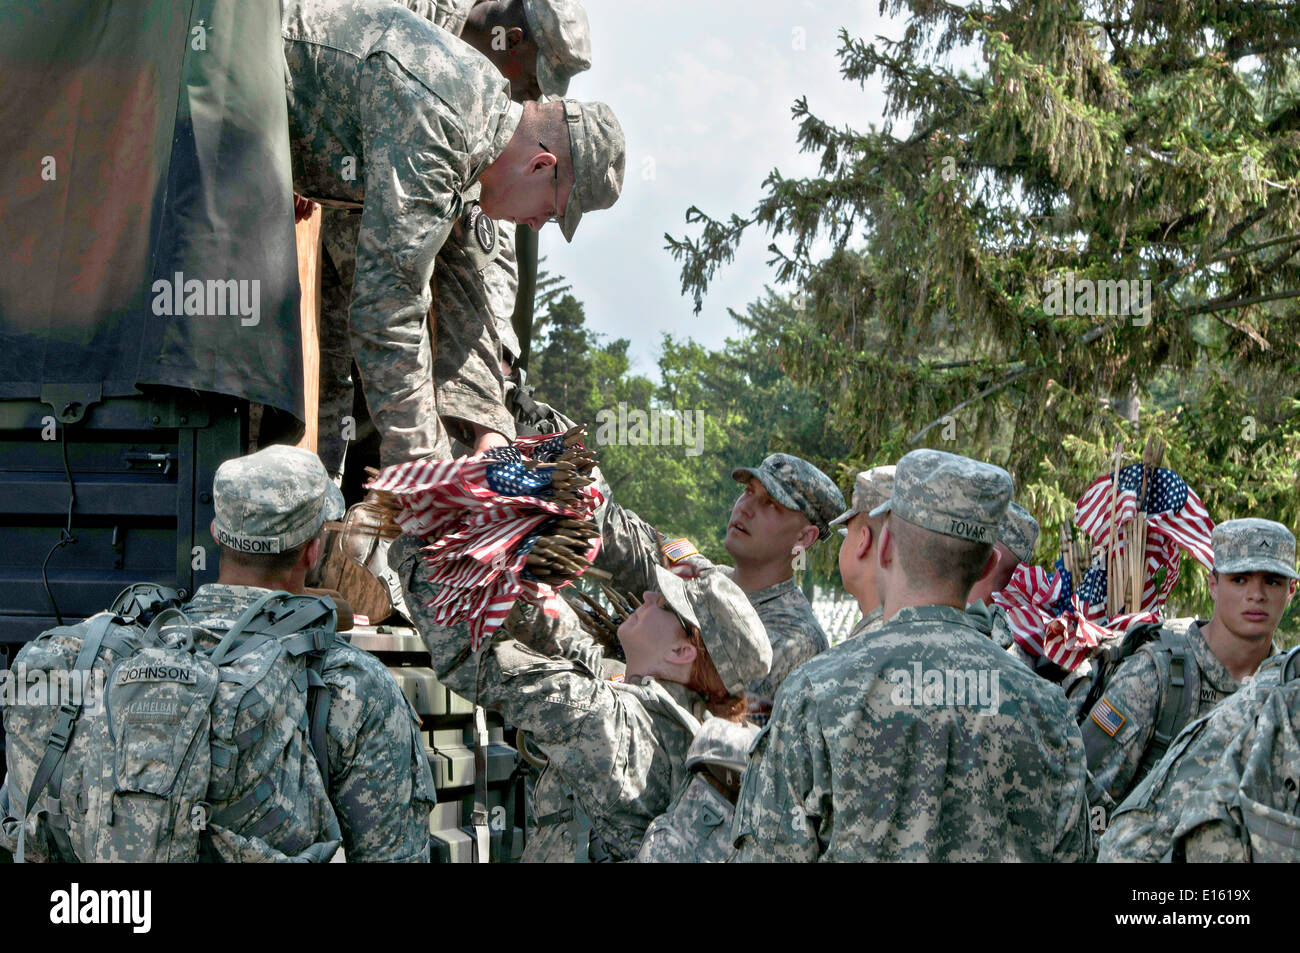 US Army soldier from the Old Guard distribute flags to be placed in front of grave sites in honor of Memorial Day at Arlington National Cemetery May 22, 2014 in Arlington, Virginia. Stock Photo